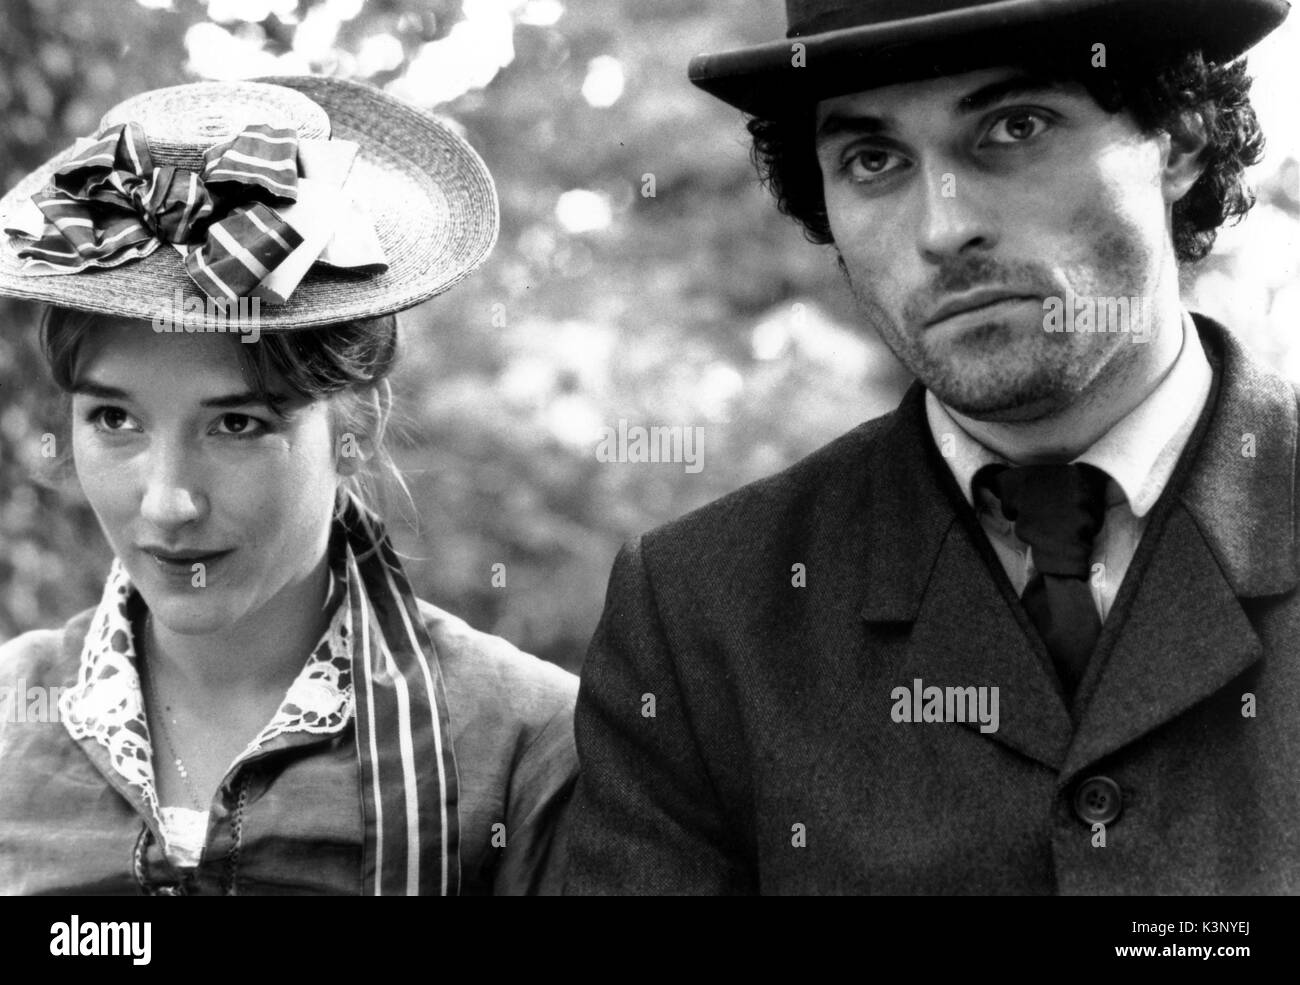 THE WOODLANDERS [BR 1997] EMILY WOOF as Grace Malbury, RUFUS SEWELL as Giles Winterbourne     Date: 1997 Stock Photo